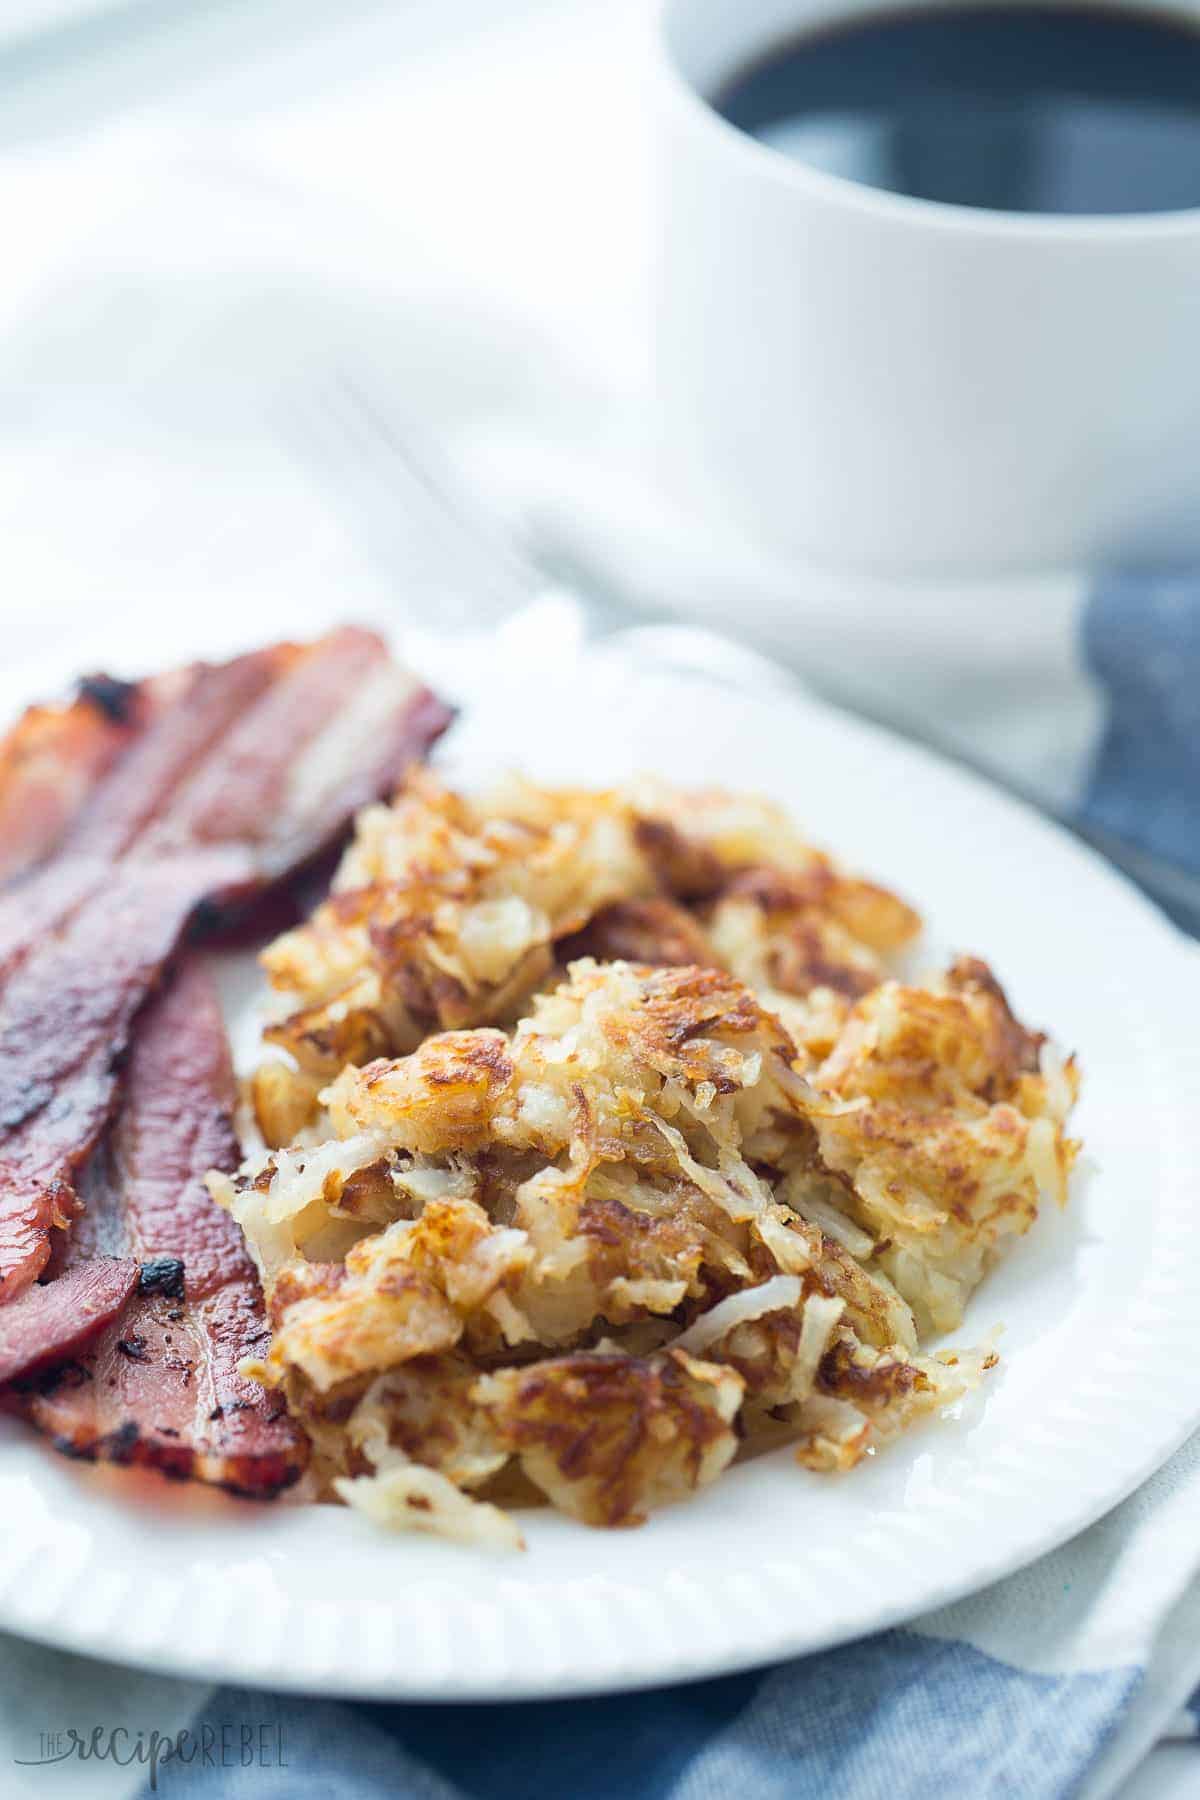 pile of crispy hashbrowns on white plate with two pieces of bacon and blue towel underneath